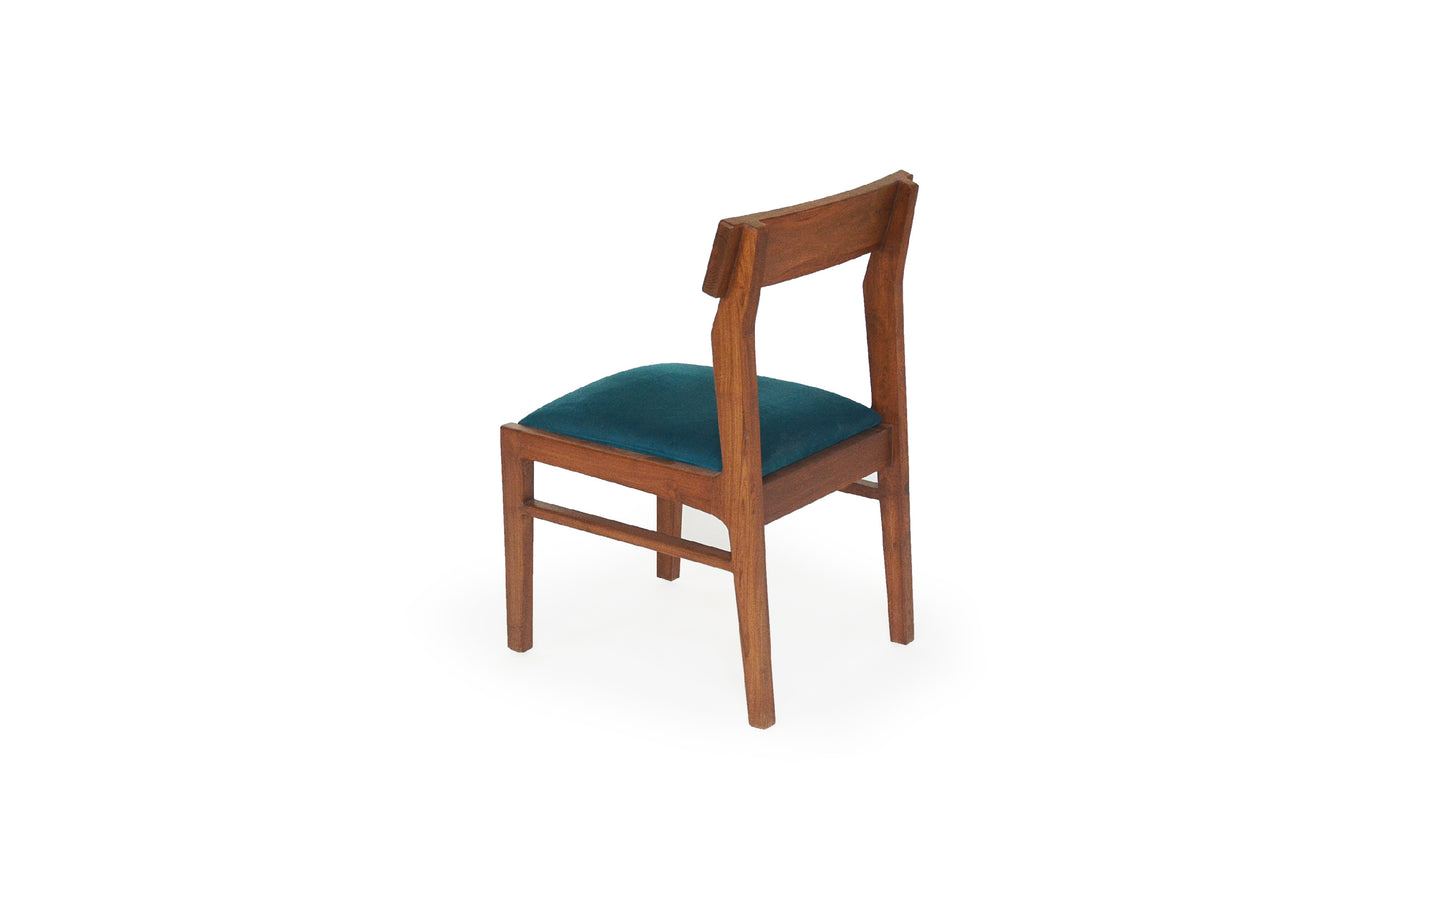 Neil Dining Chair